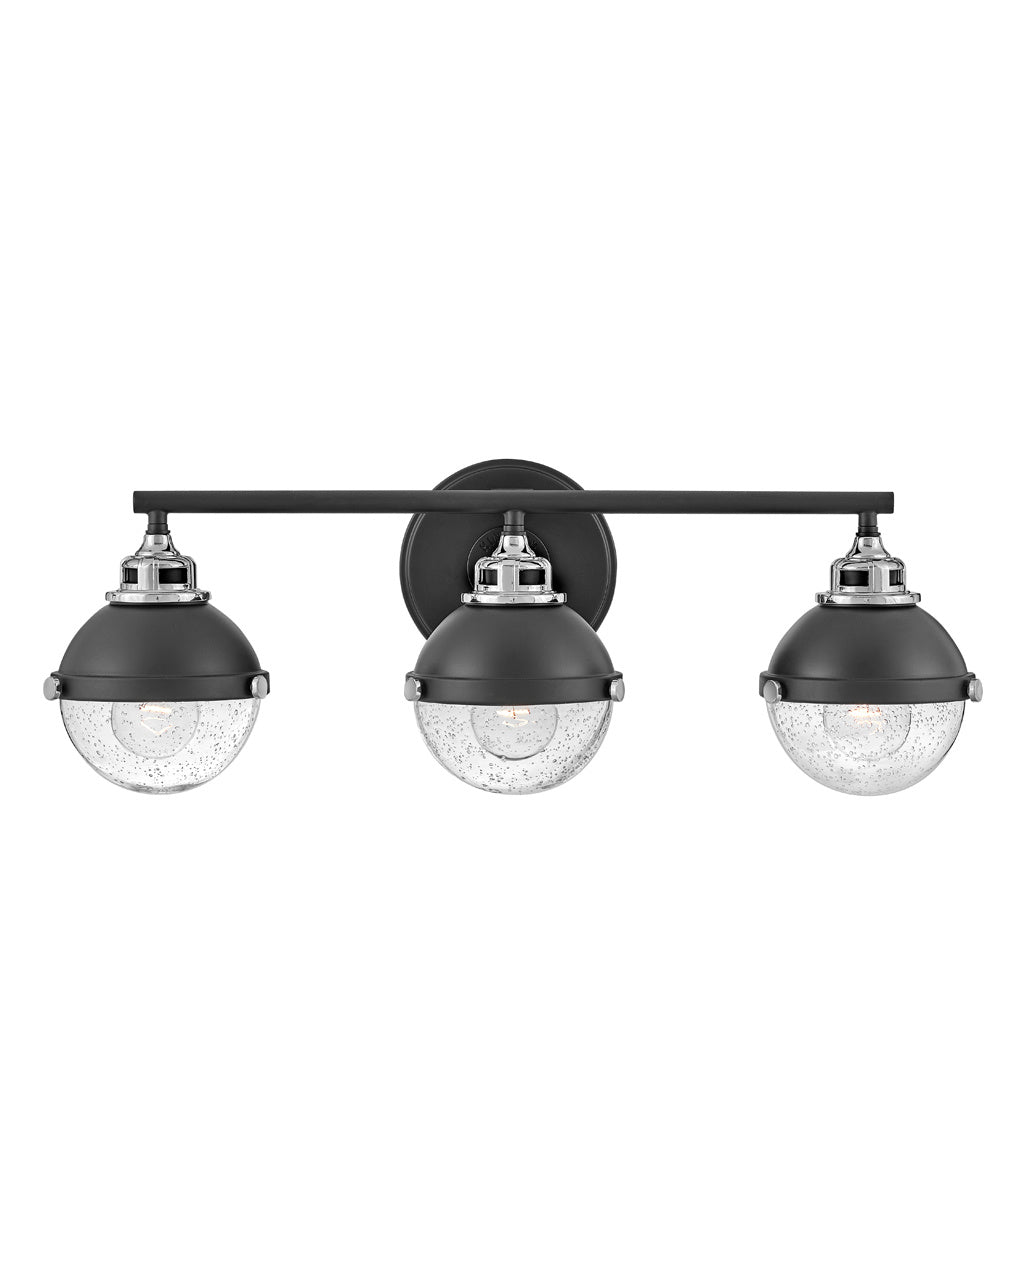 Fletcher Three Light Vanity in Black with Chrome accents by Hinkley Lighting